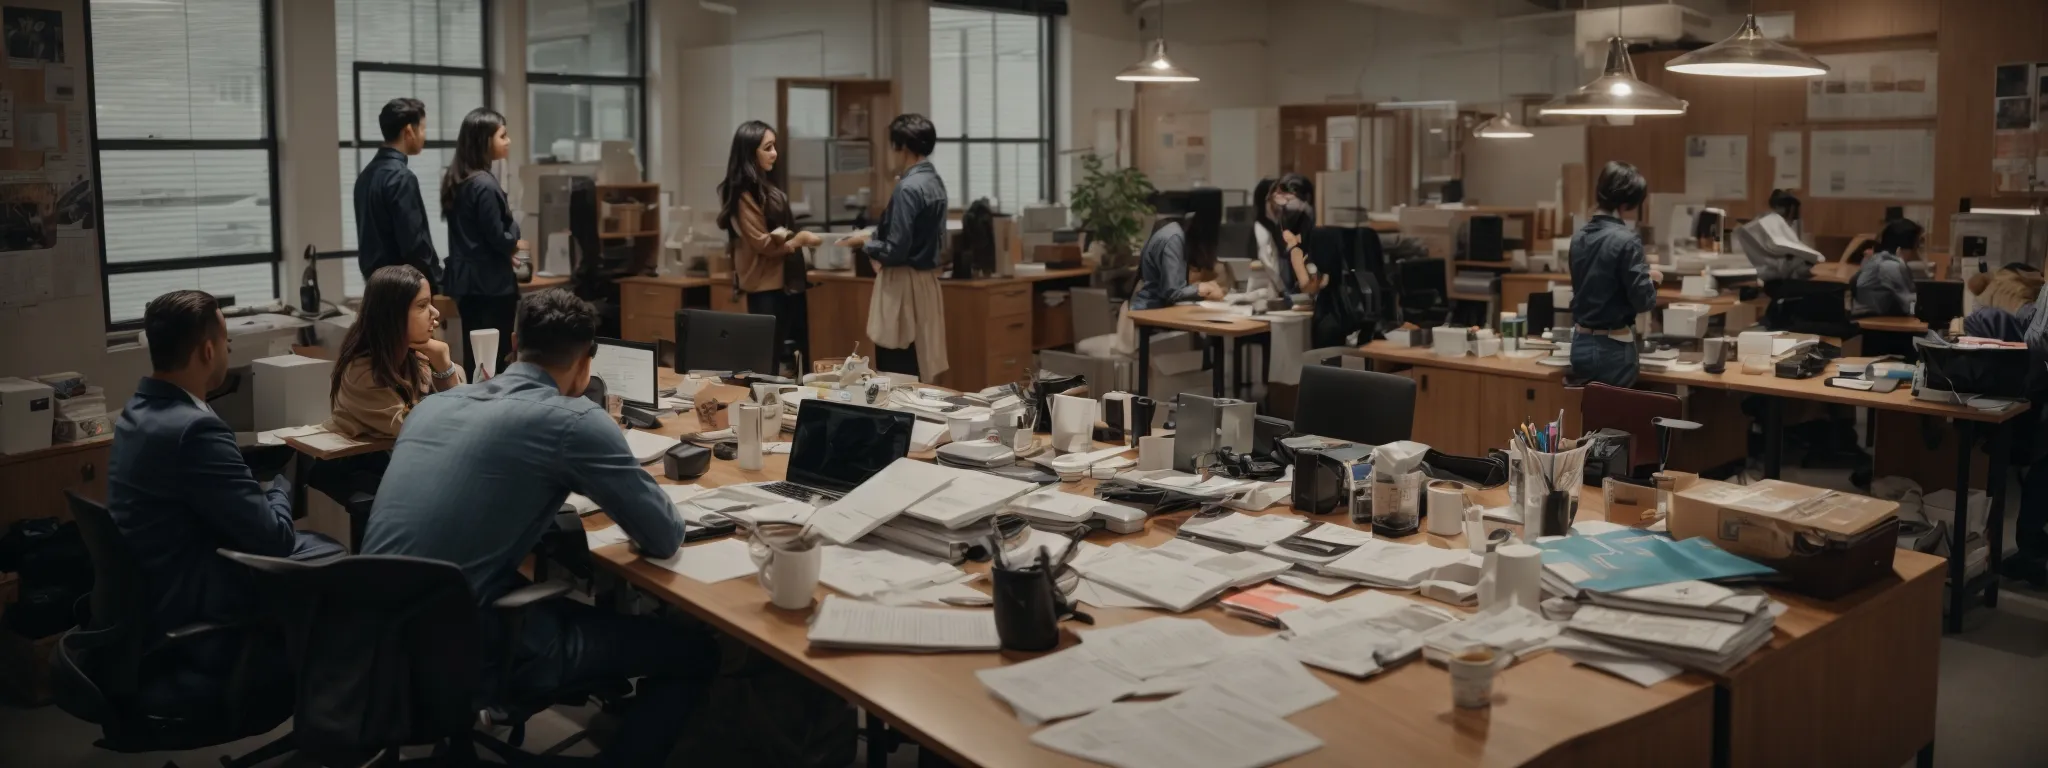 a bustling startup office with team members brainstorming around a cluttered table strewn with marketing materials.